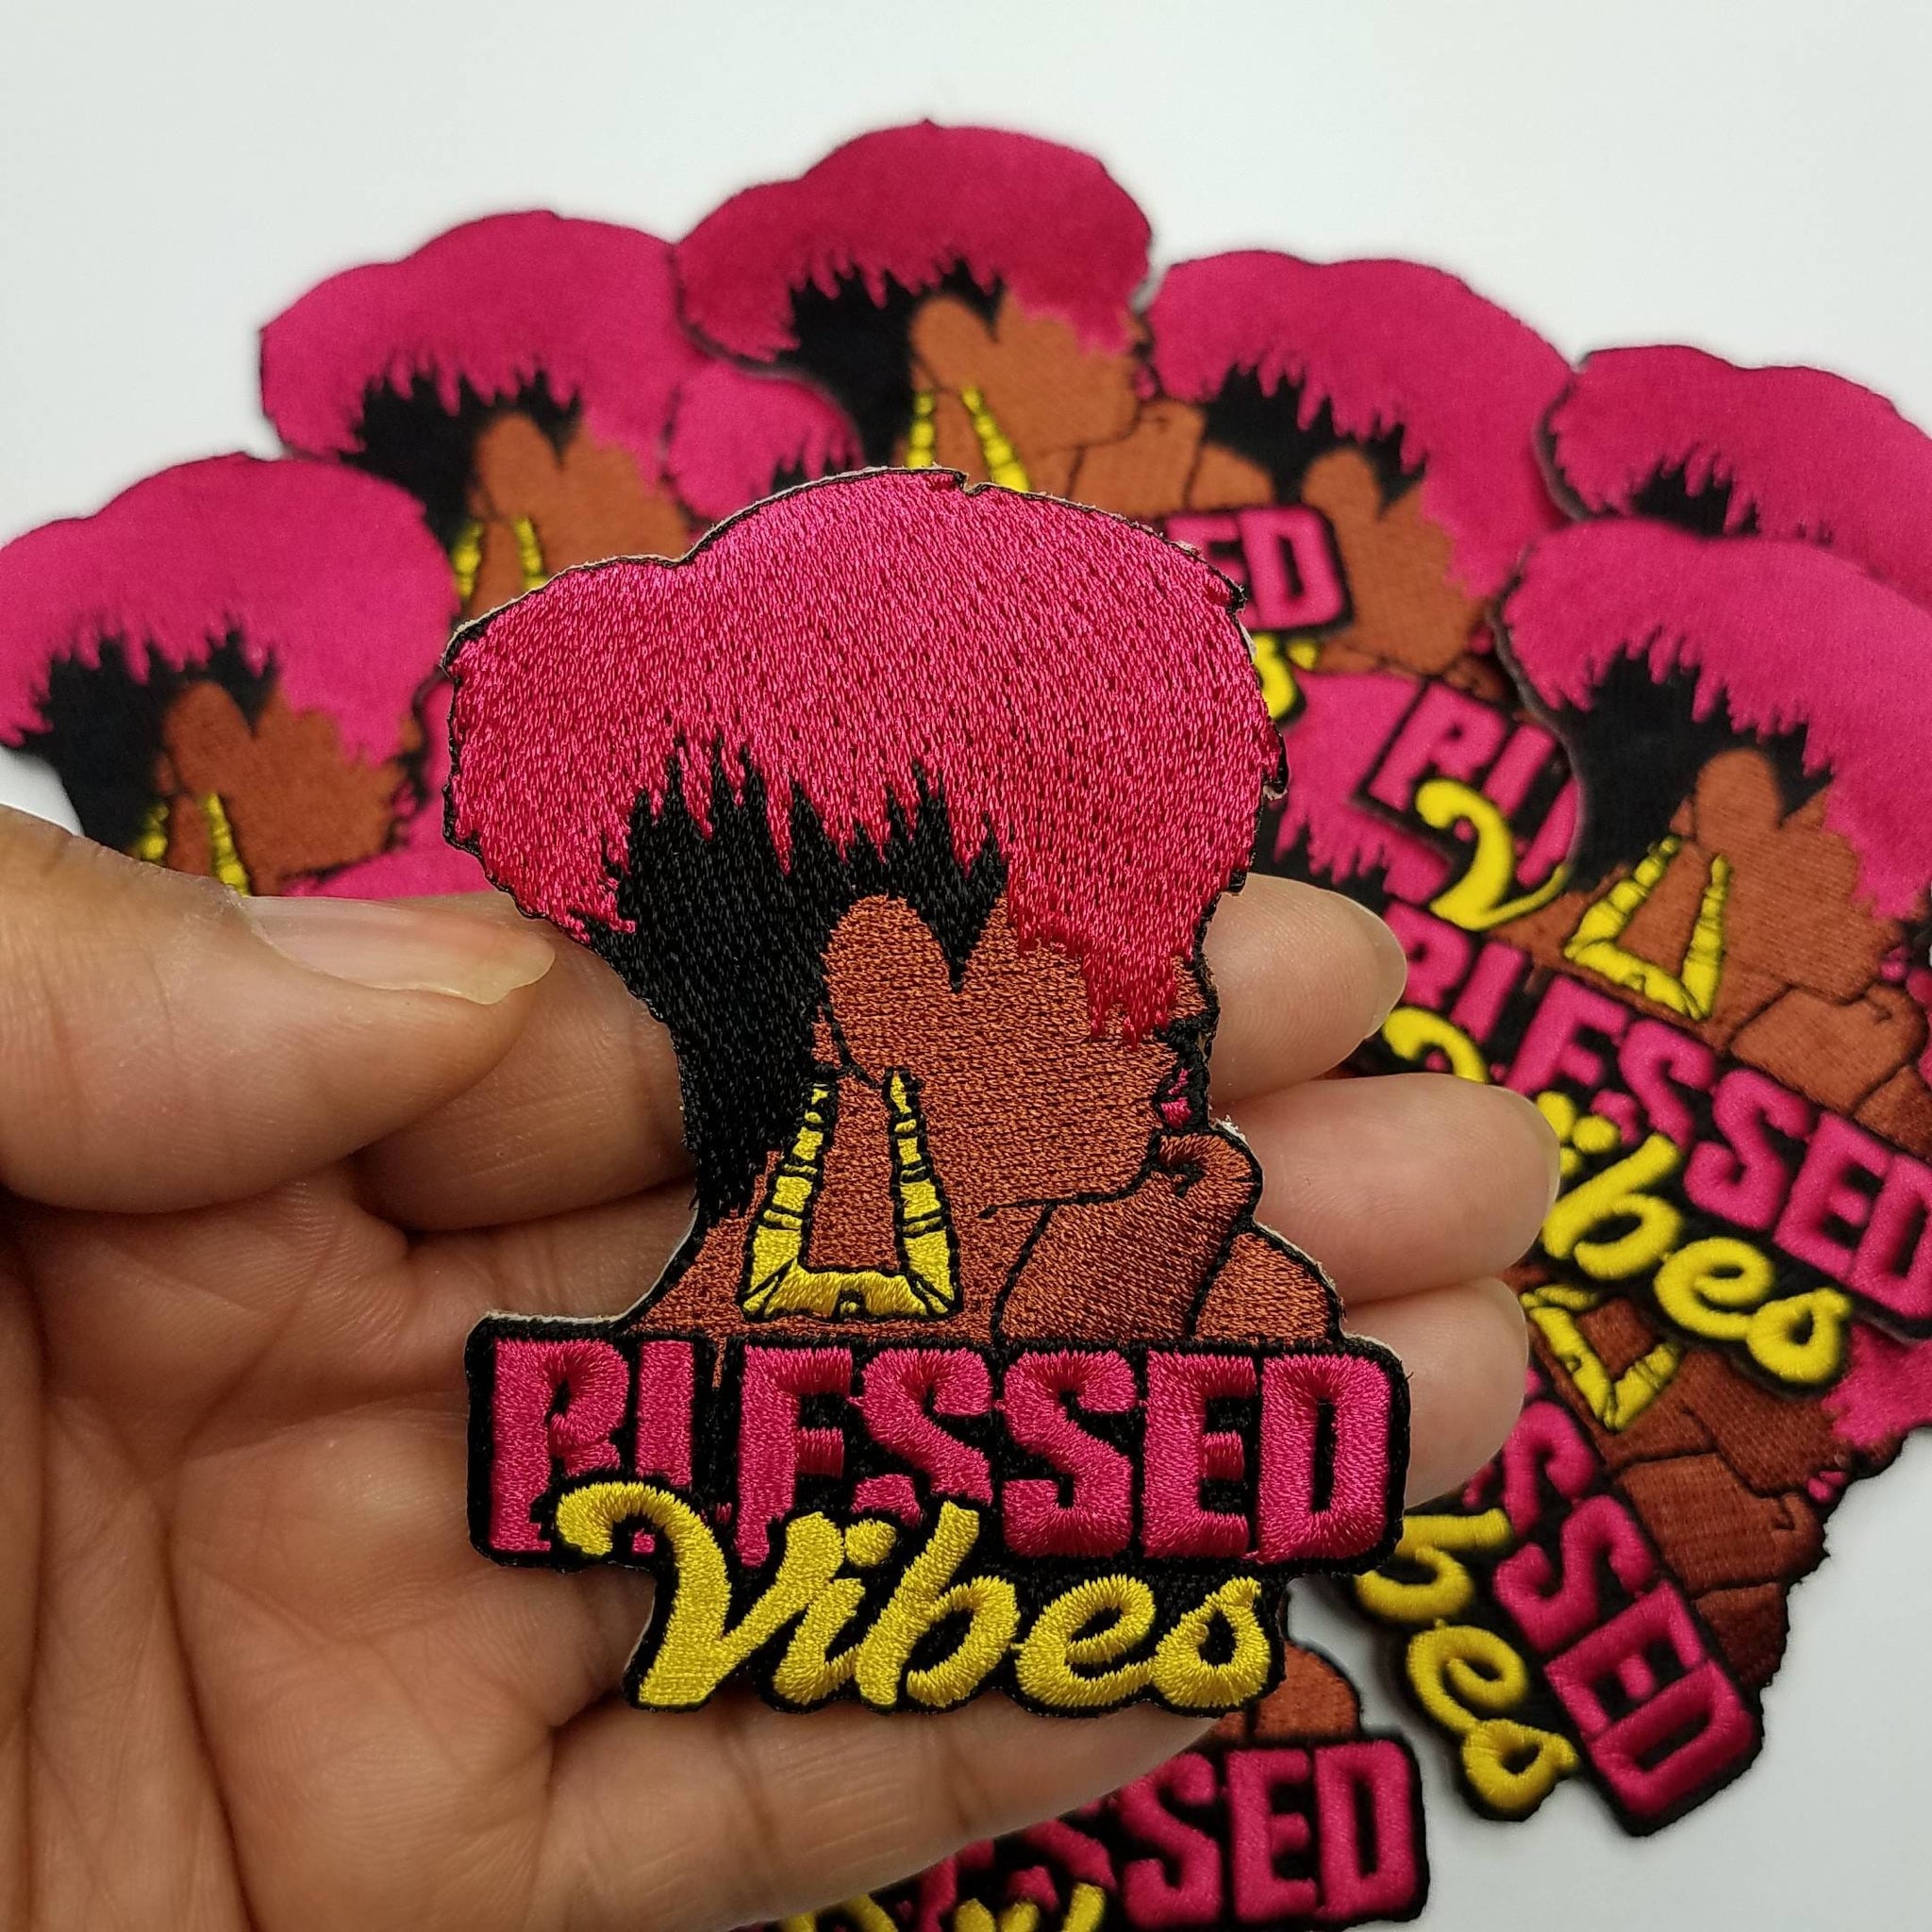 Blessed Vibes, SMALL 3" Hot Pink and Yellow, Inspirational Patch, Iron-on; Black Girl Magic Patch, Positive Thinking Patch for Denim Jacket